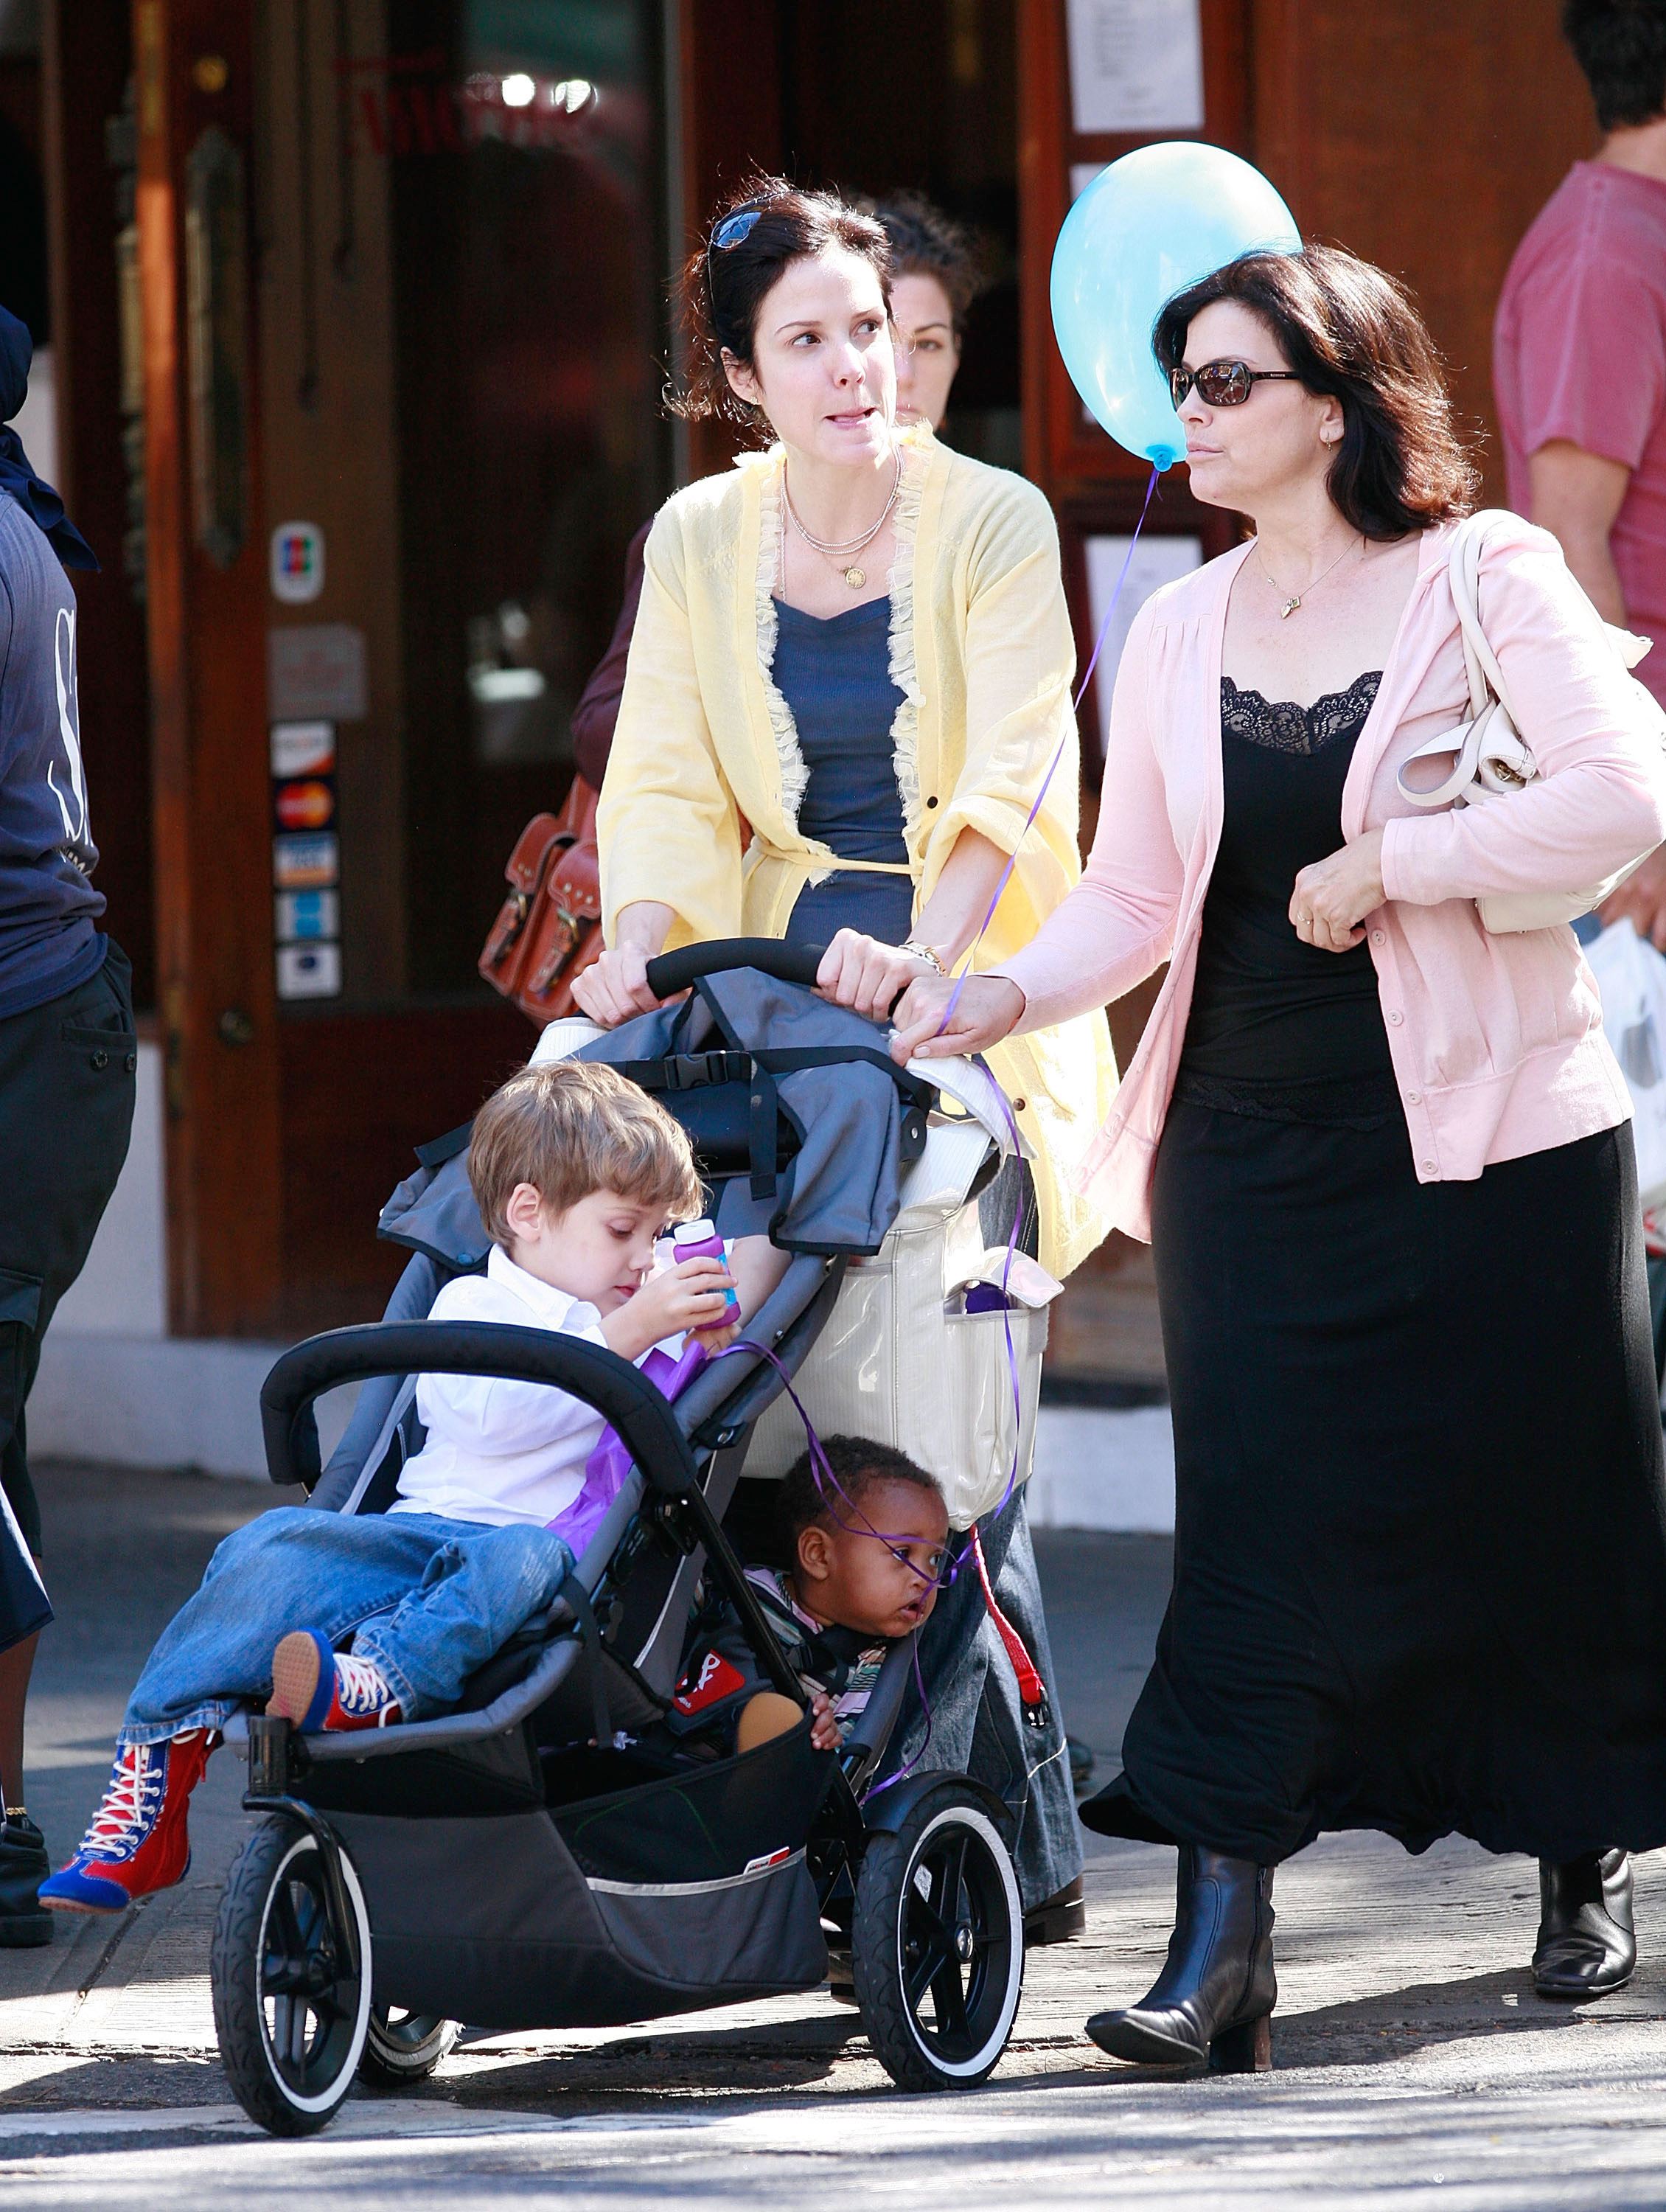 <p>Mary-Louise Parker, then-3-year-old son William Atticus Parker -- whose dad, actor Billy Crudup, famously ended his long romance with the actress when she was pregnant -- and then-newly adopted baby daughter Caroline Aberash Parker joined Mary-Louise's mother for a walk in New York City's SoHo district on Sept. 29, 2007. Keep reading to see her kids as teenagers...</p>